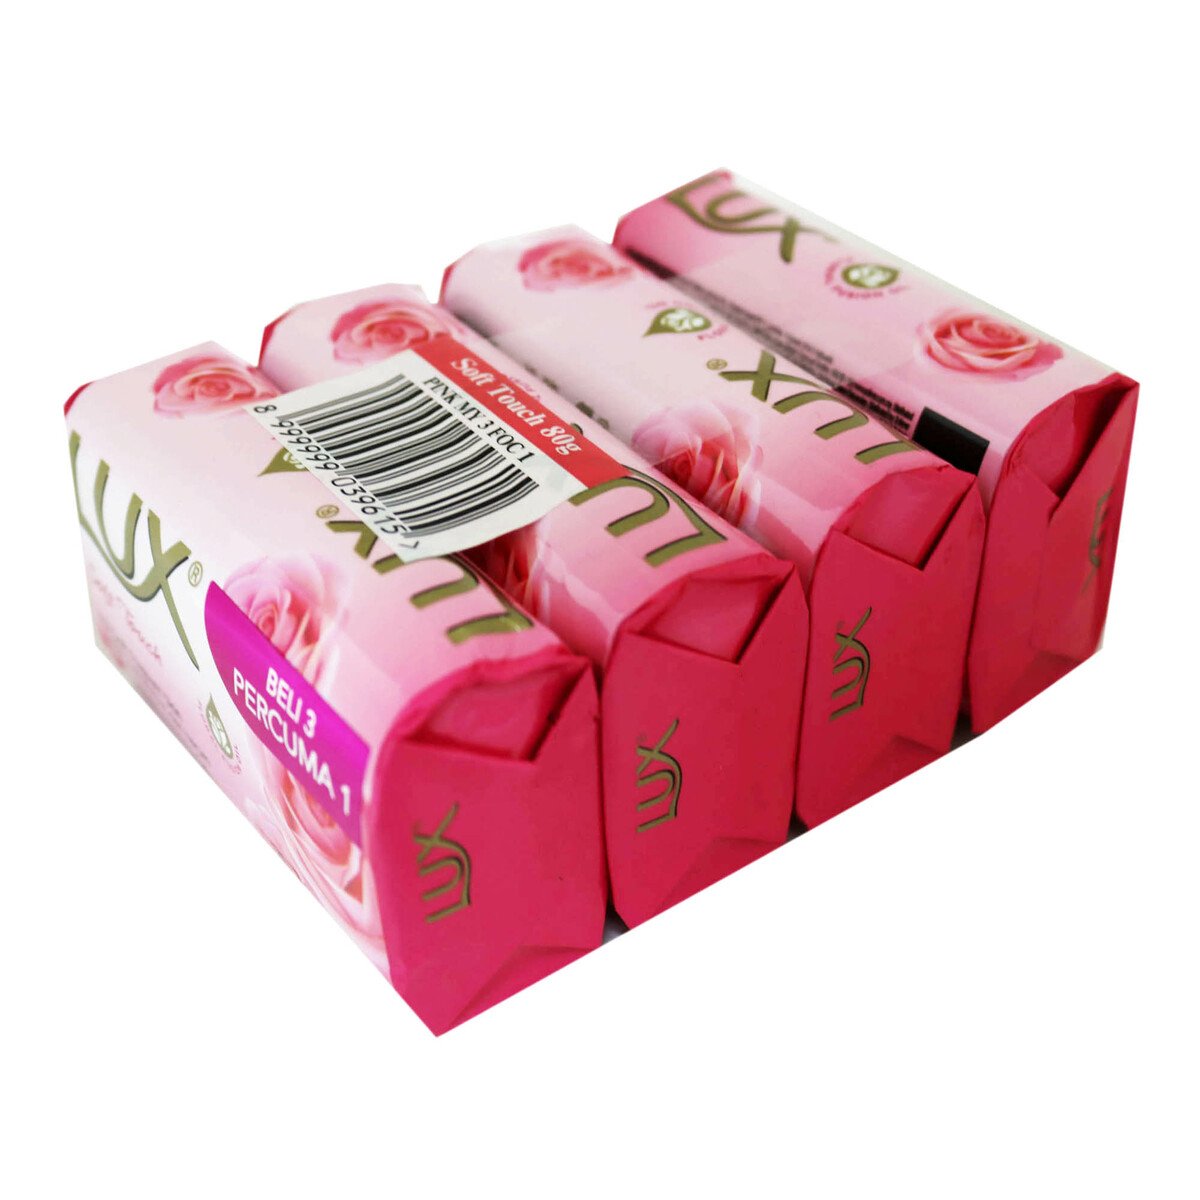 Lux Bar Soap Soft Touch 4 x 80g